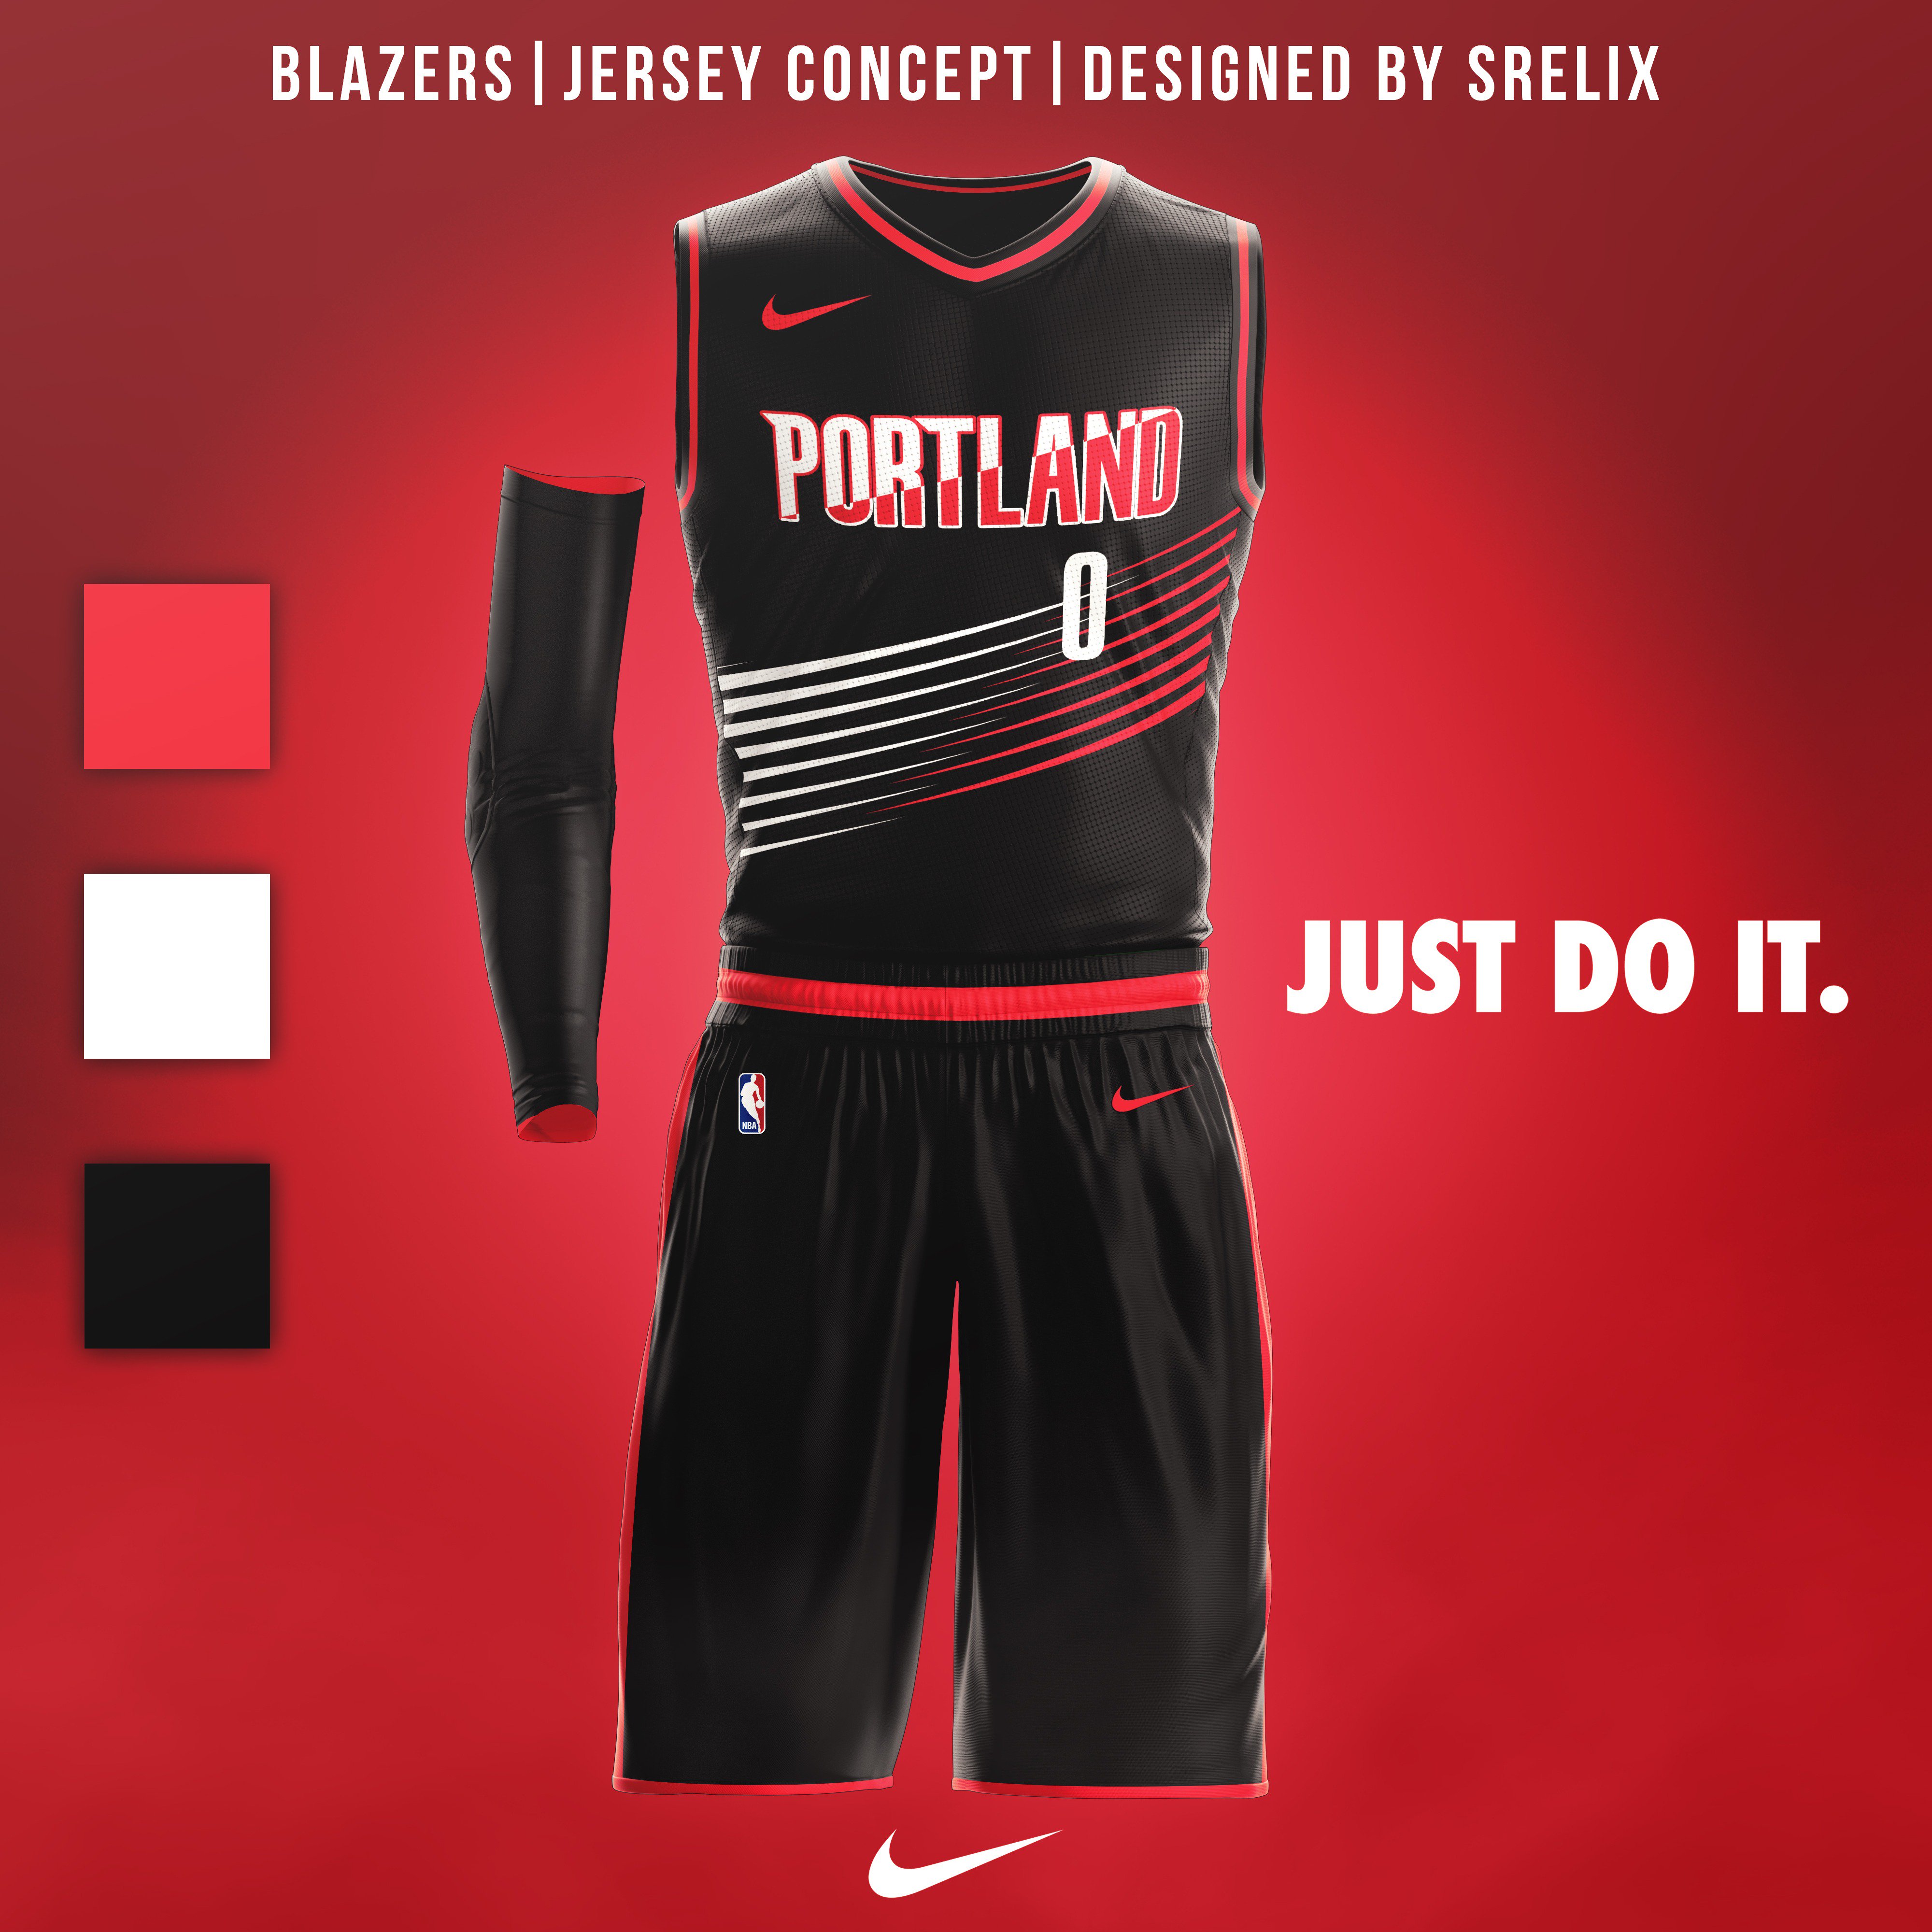 Trailblazer concept jersey. Let me know your thoughts! : r/ripcity